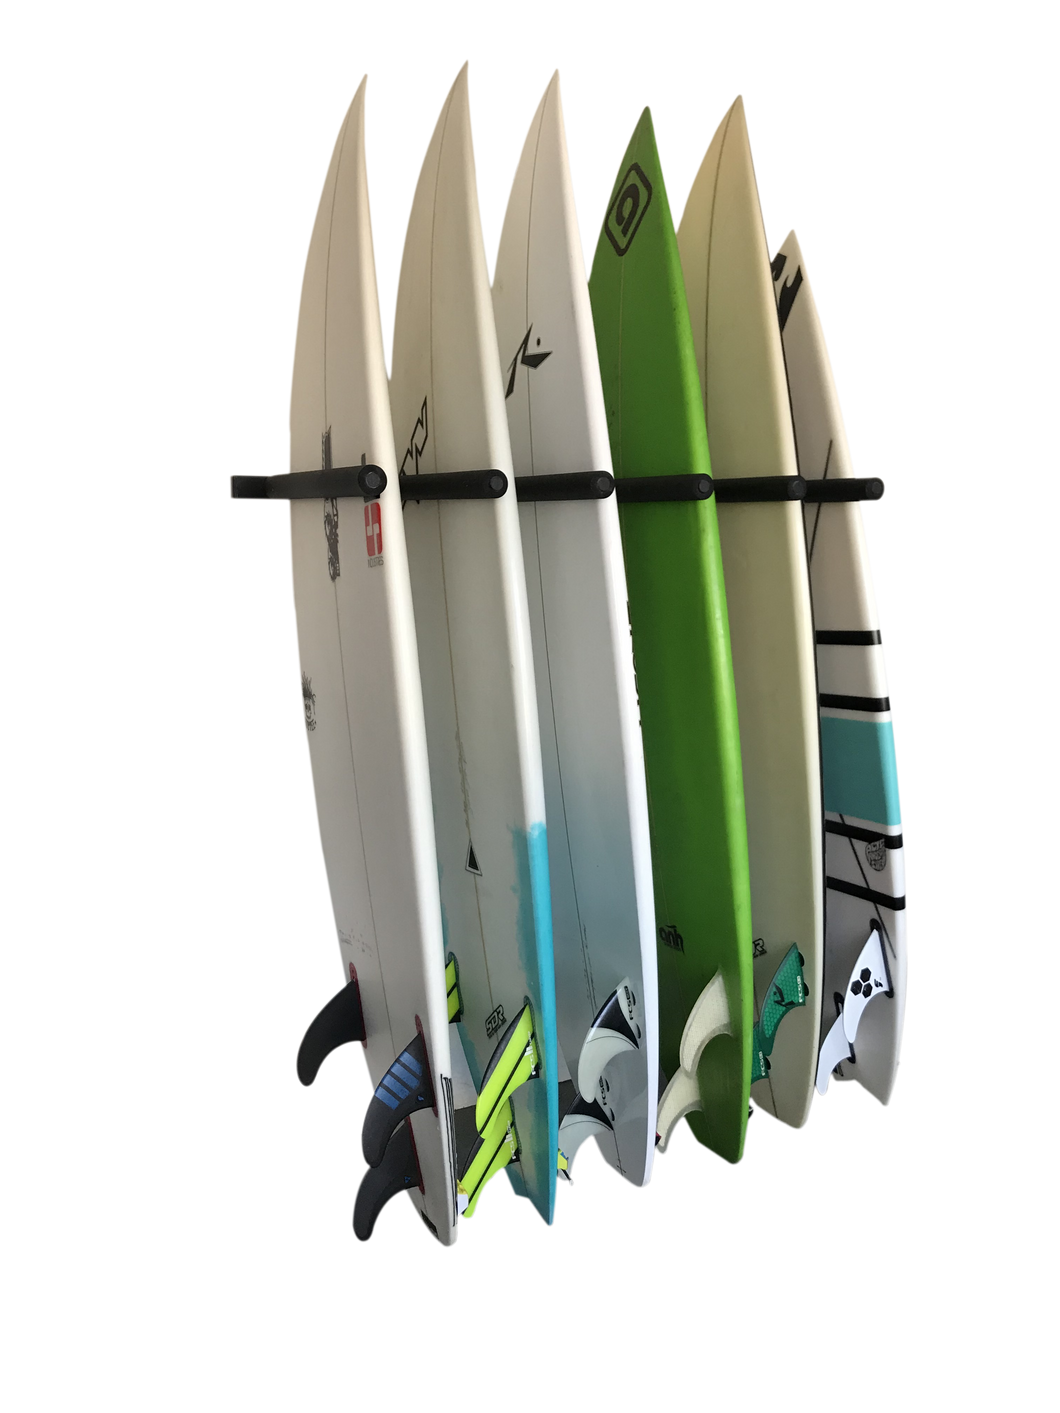 Wall mounted vertical surfboard racks powder coated black to hold 6 boards